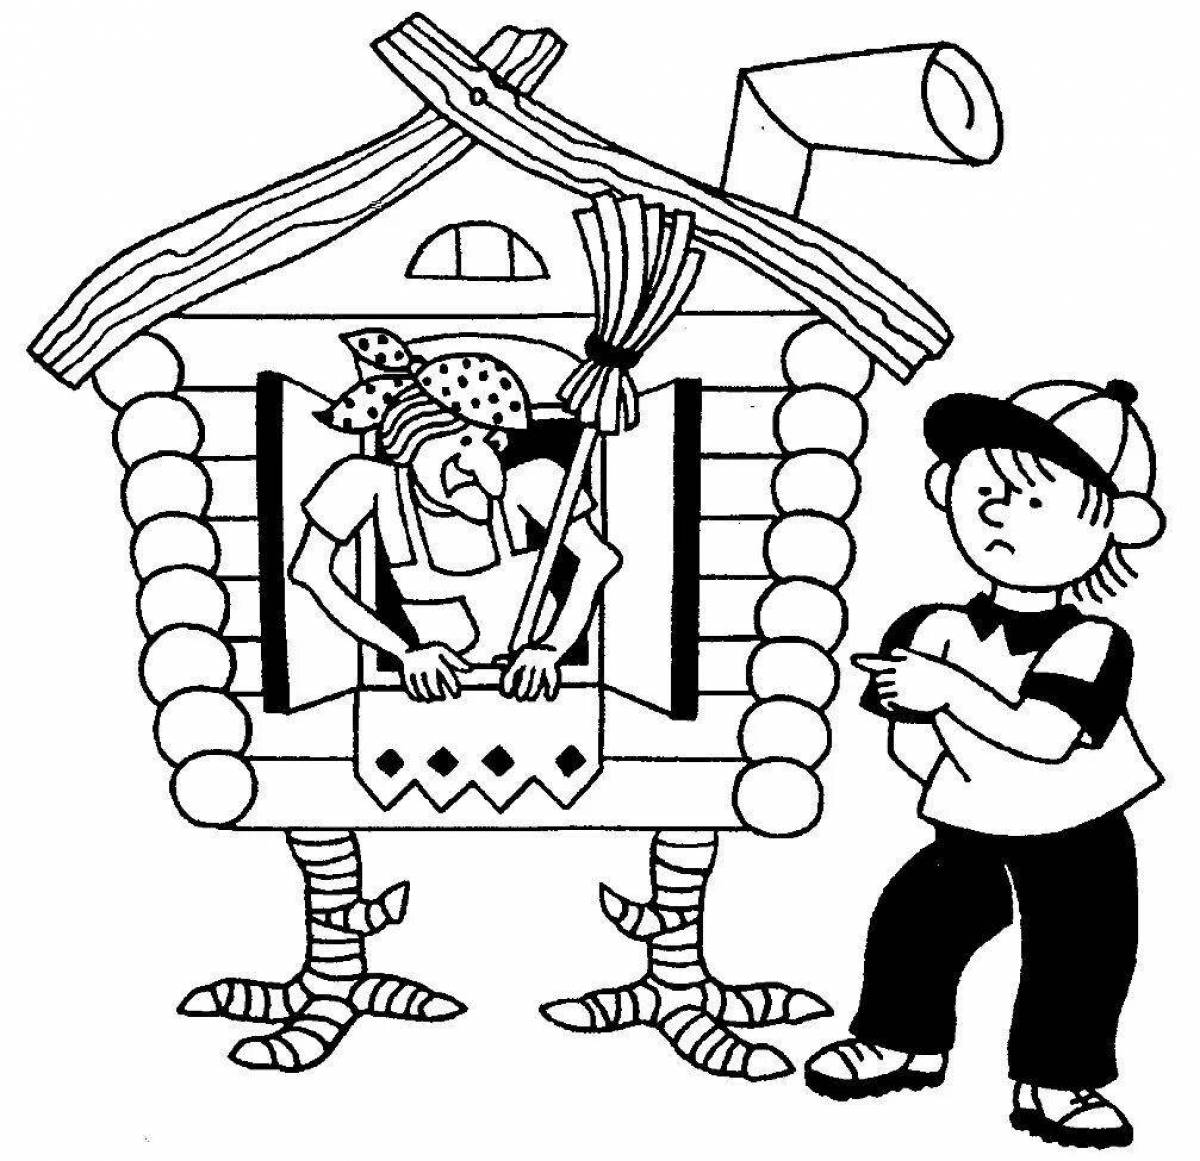 Coloring hut for children